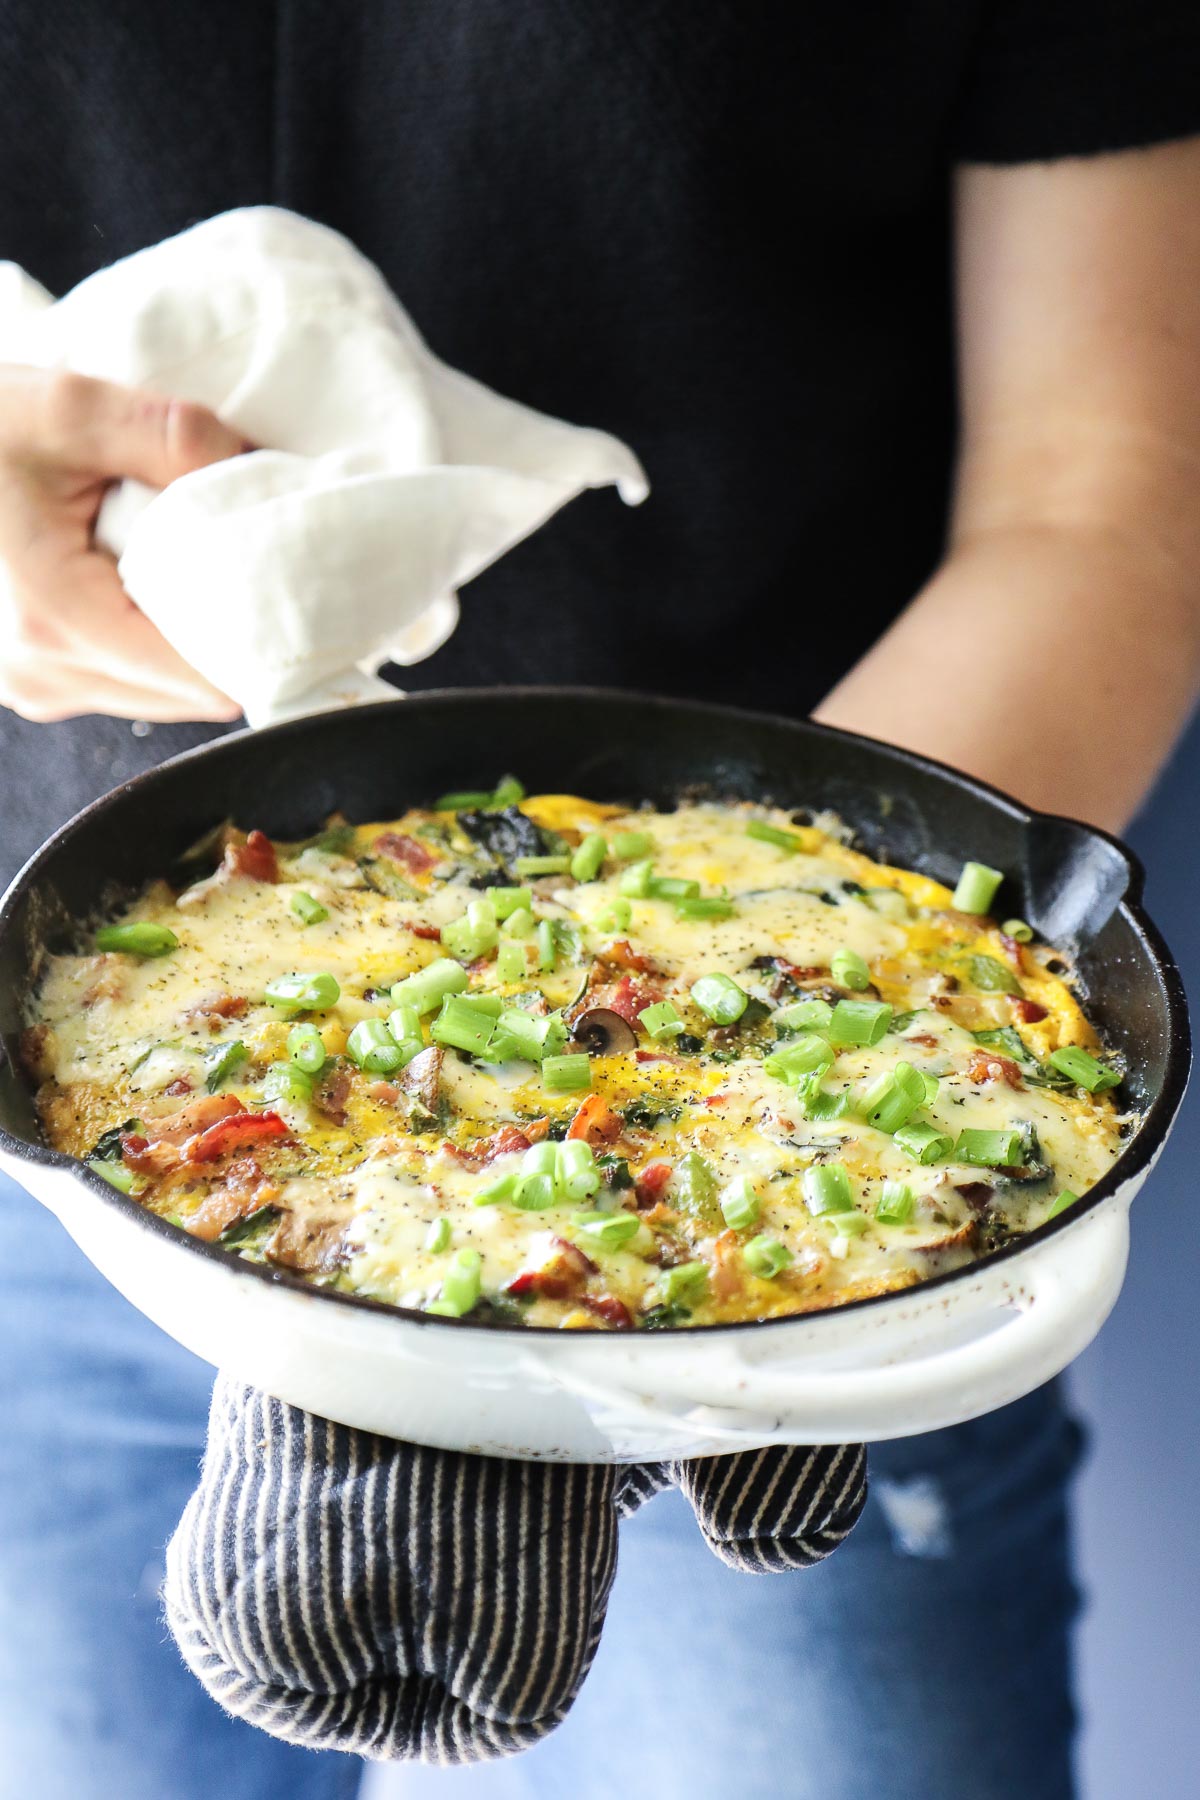 Hands holding a cast iron skillet with a veggie frittata baked inside.